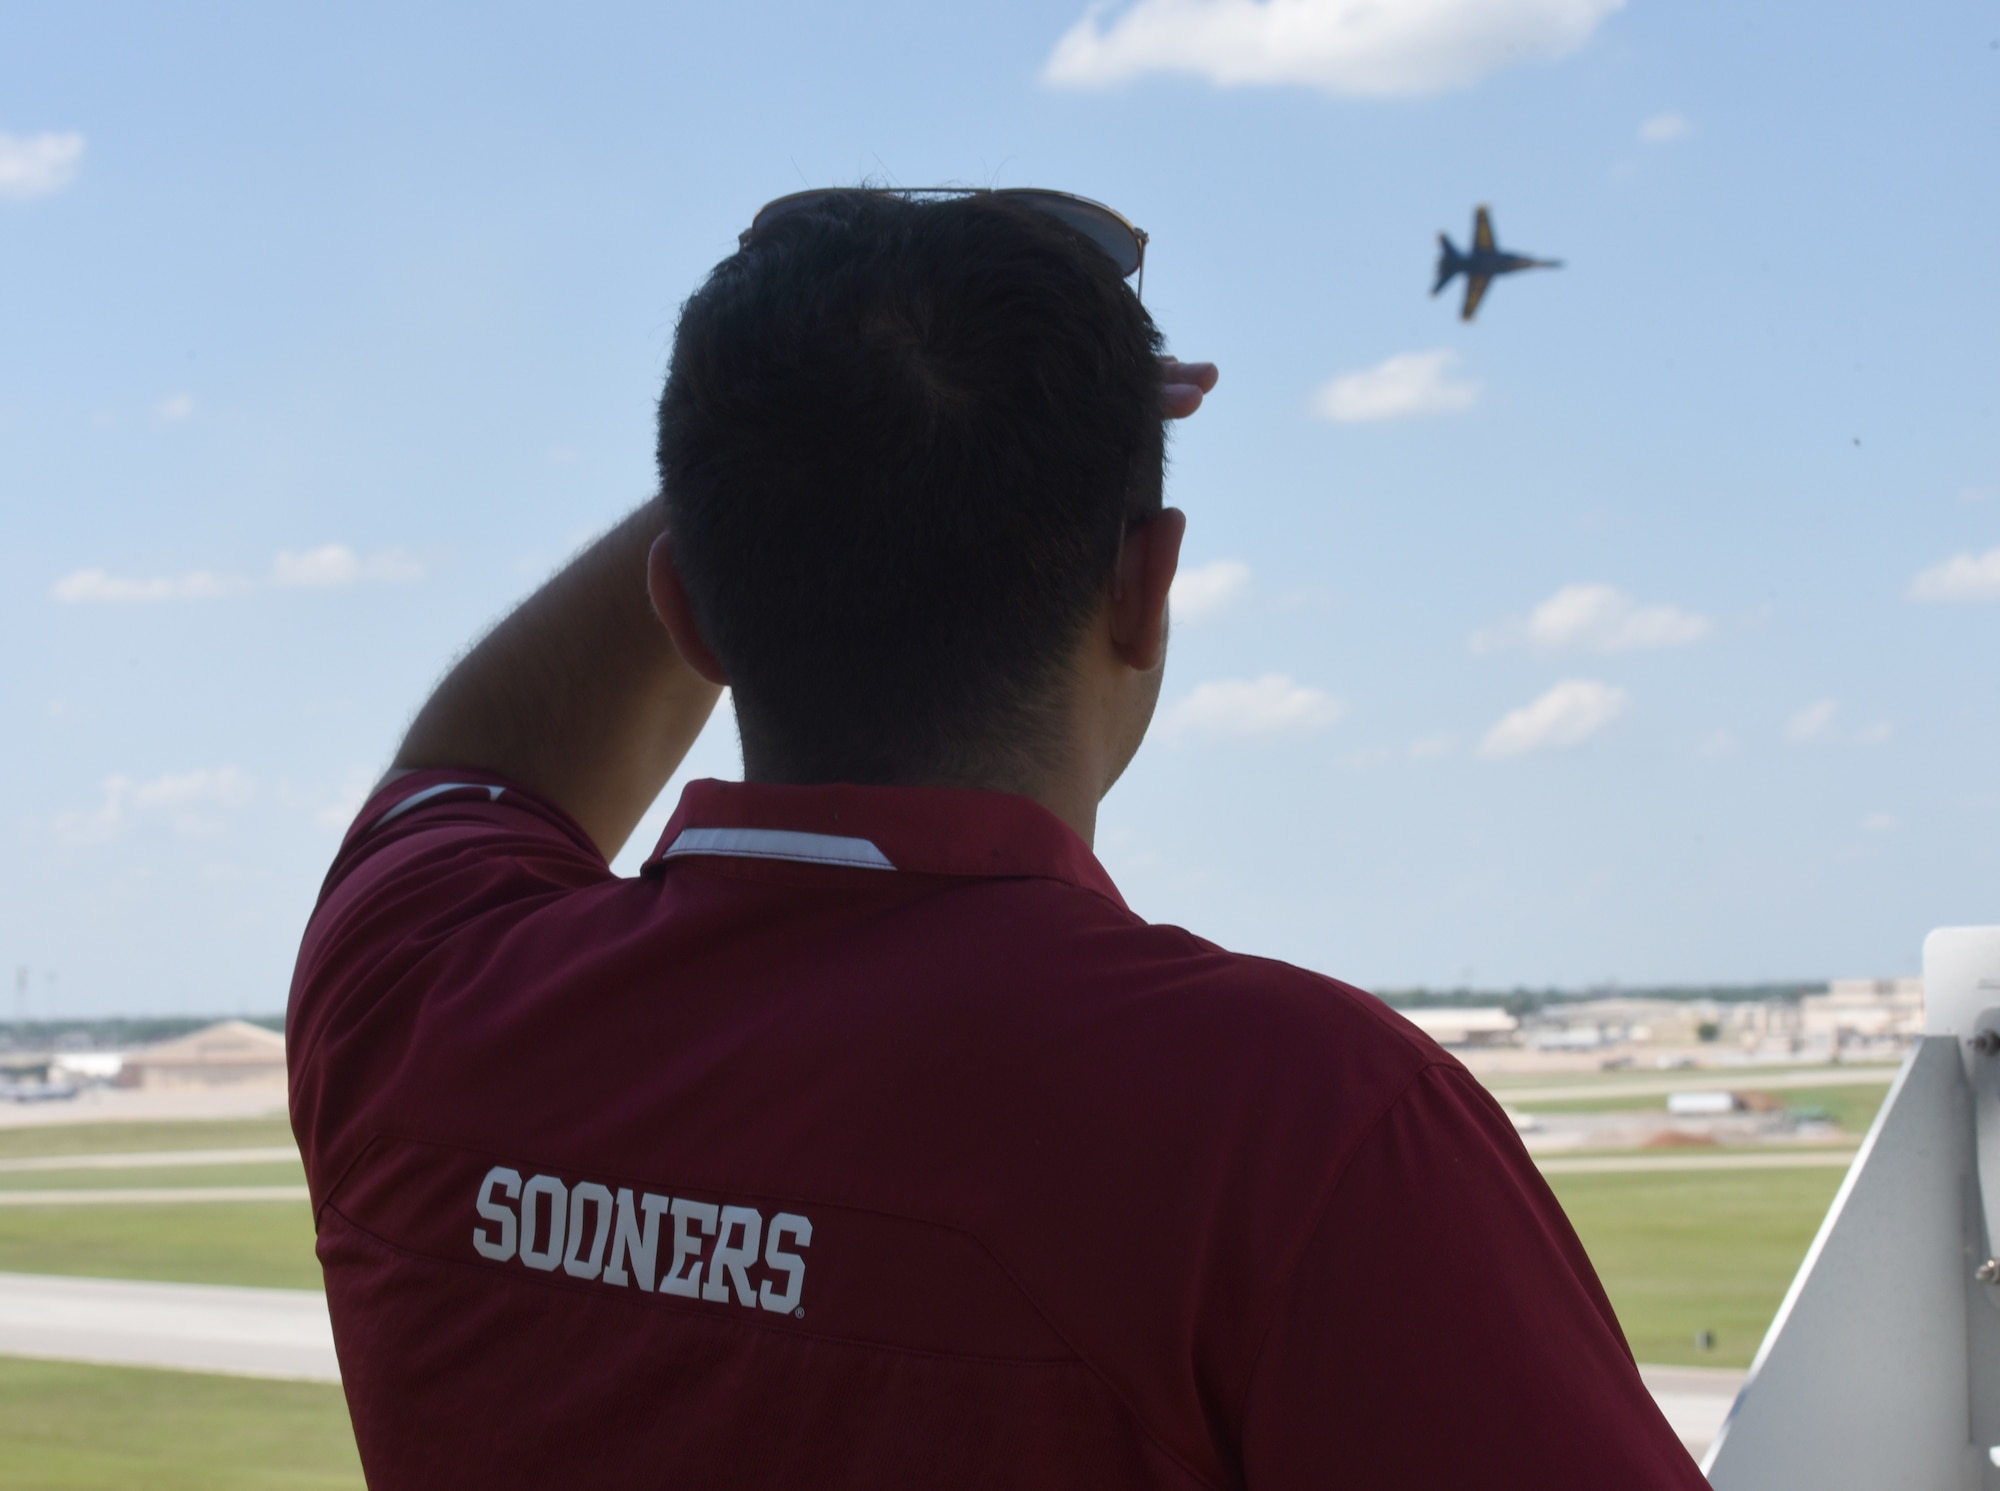 Tinker Take Off staff writer Jacob McGuire watches from Tinker Air Force Base air traffic control tower as an F/A-18 Hornet from the Blue Angels flight demonstration team flies by at one of their demonstrations for the bi-annual Star Spangled Salute Air & Space Show. (U.S. Air Force photo/Kelly White)